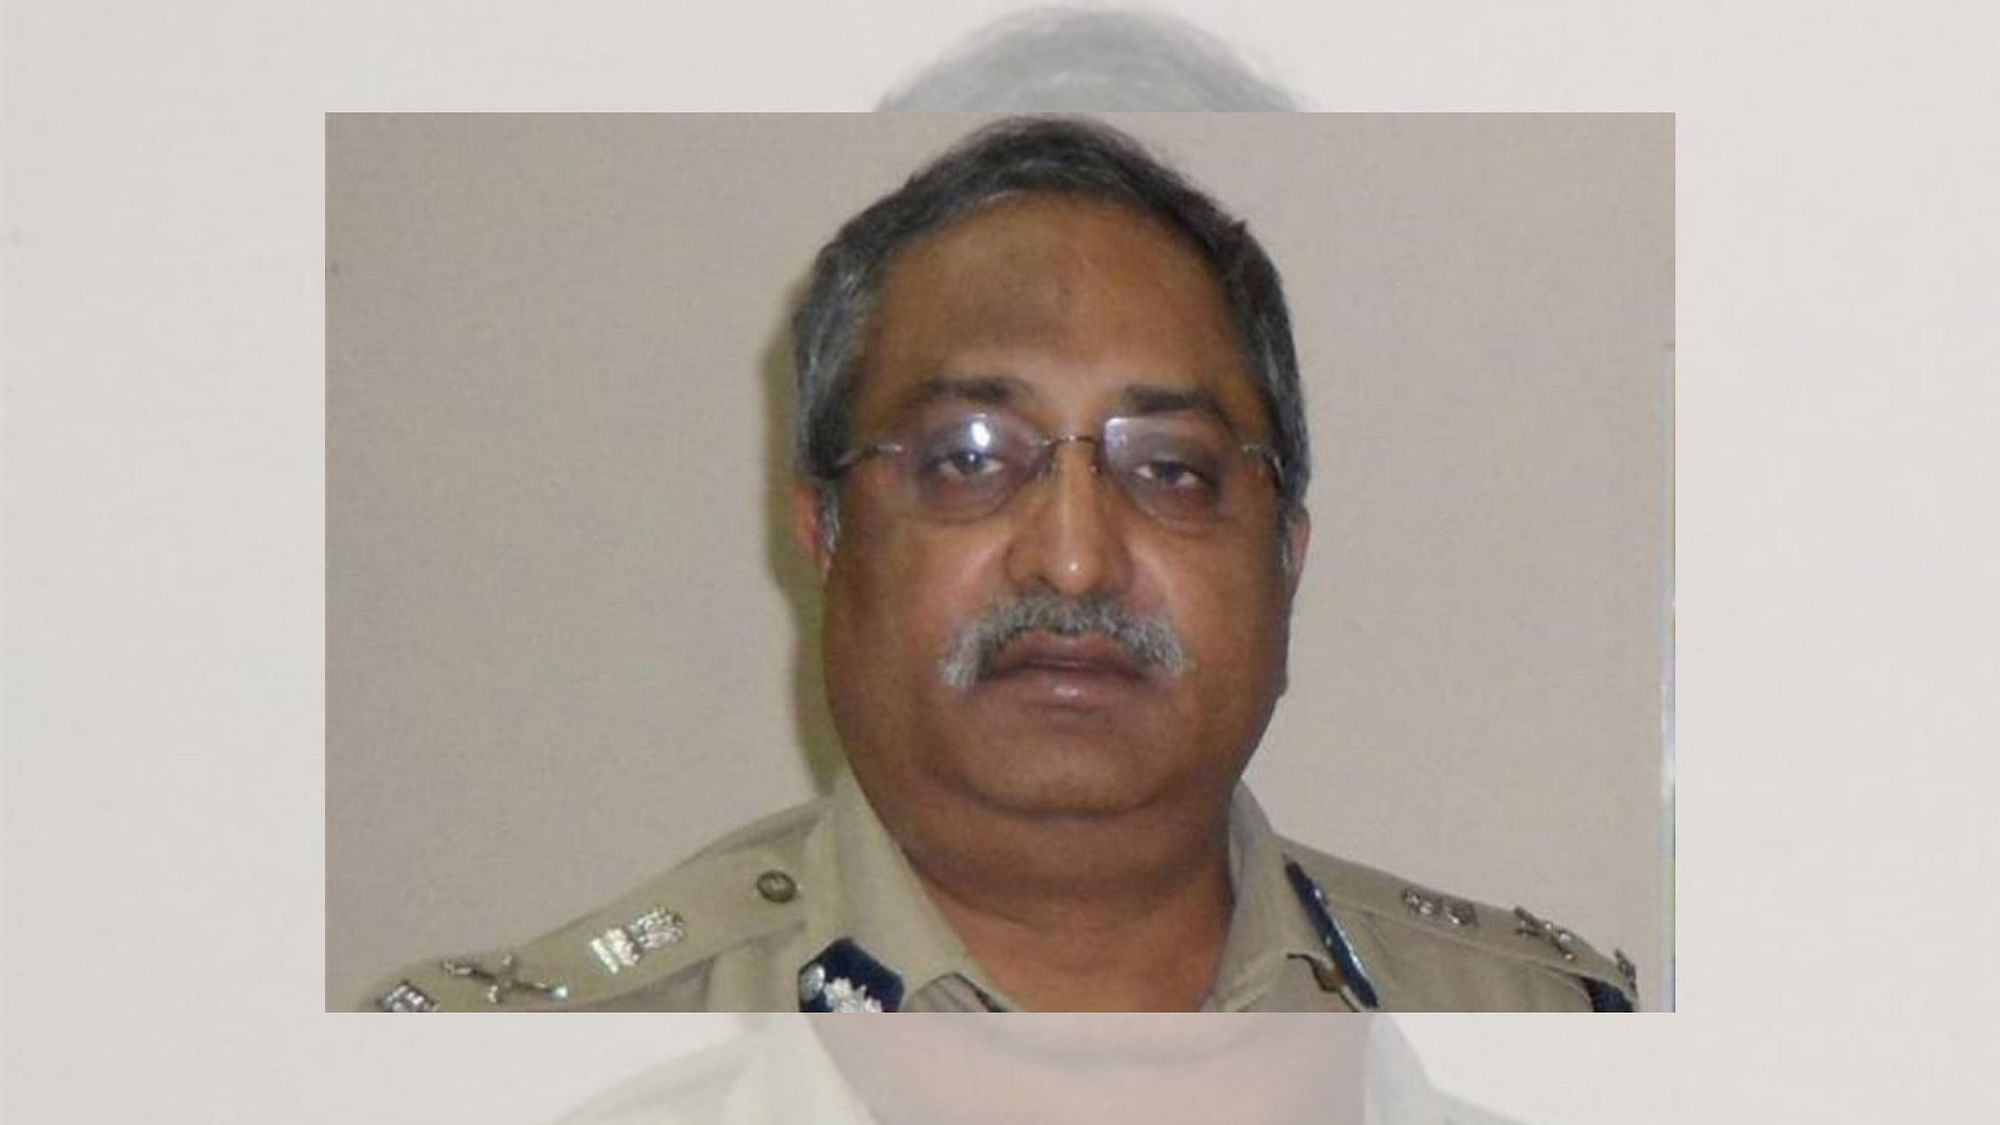 The Andhra Pradesh government suspended Director General of Police-rank IPS officer A B Venkateswara Rao for allegedly “endangering” national security through his “acts of treason” when he was state Intelligence chief during the previous regime.